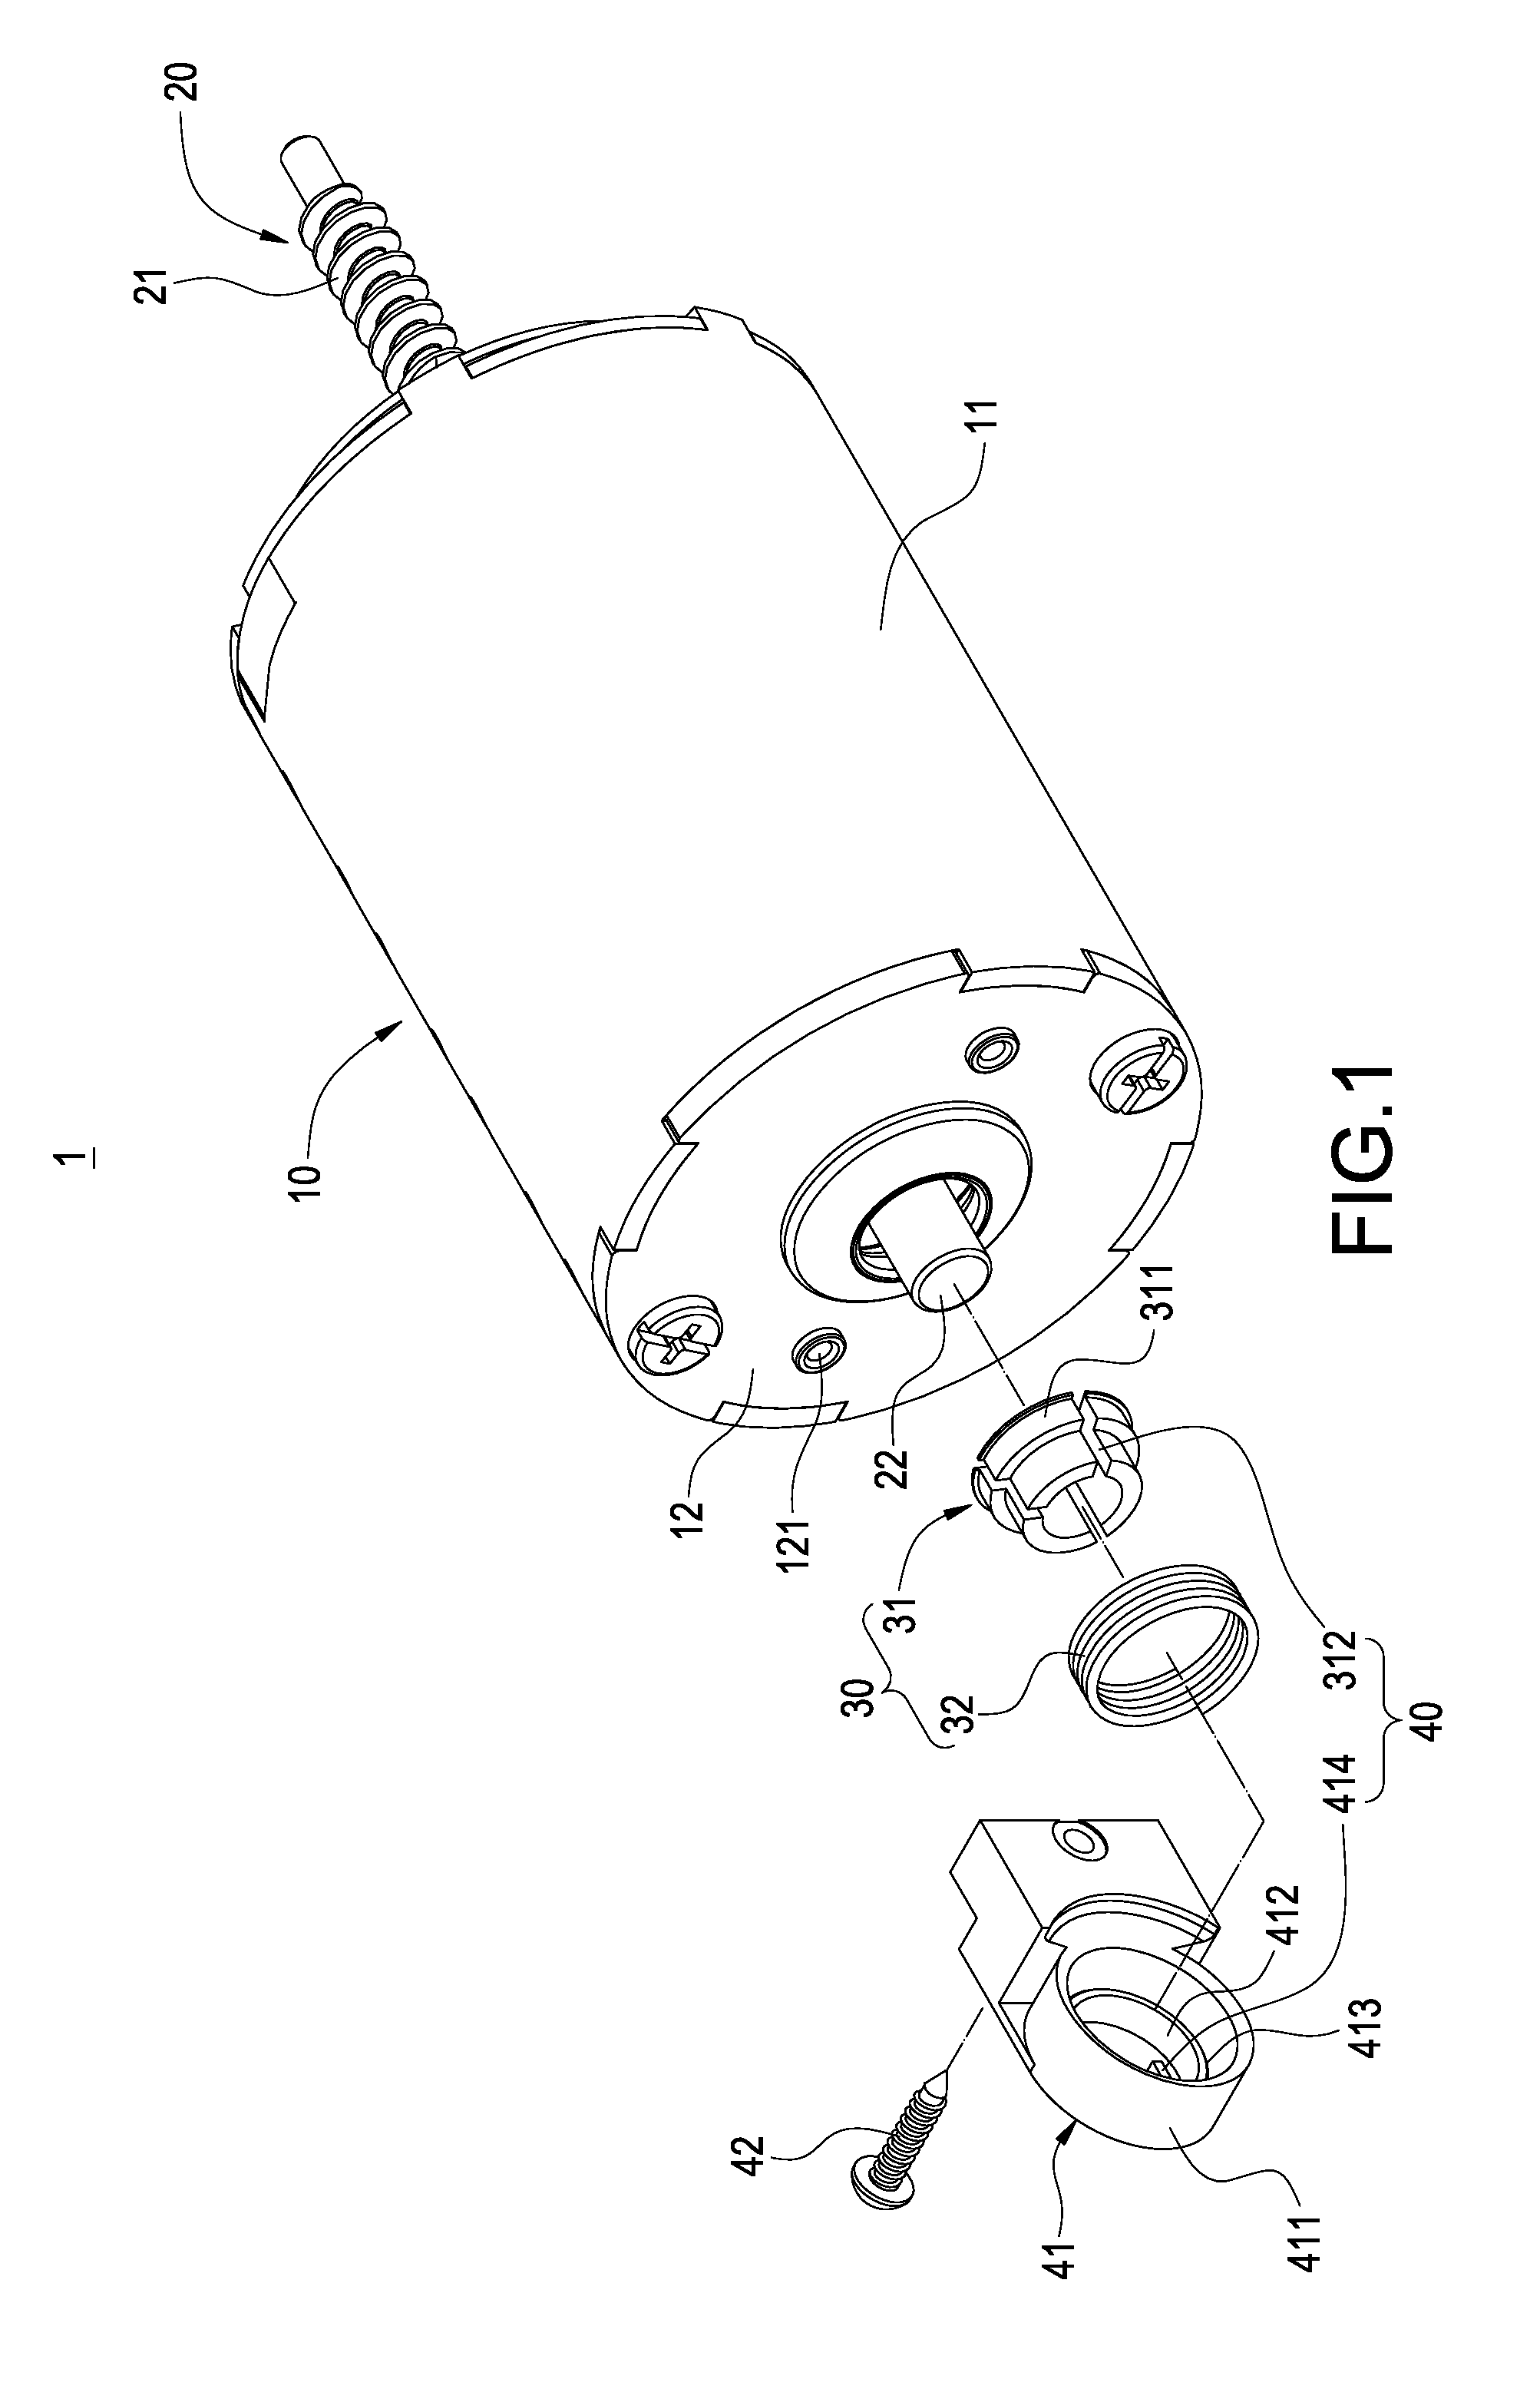 Motor having a braking function and used in linear actuator